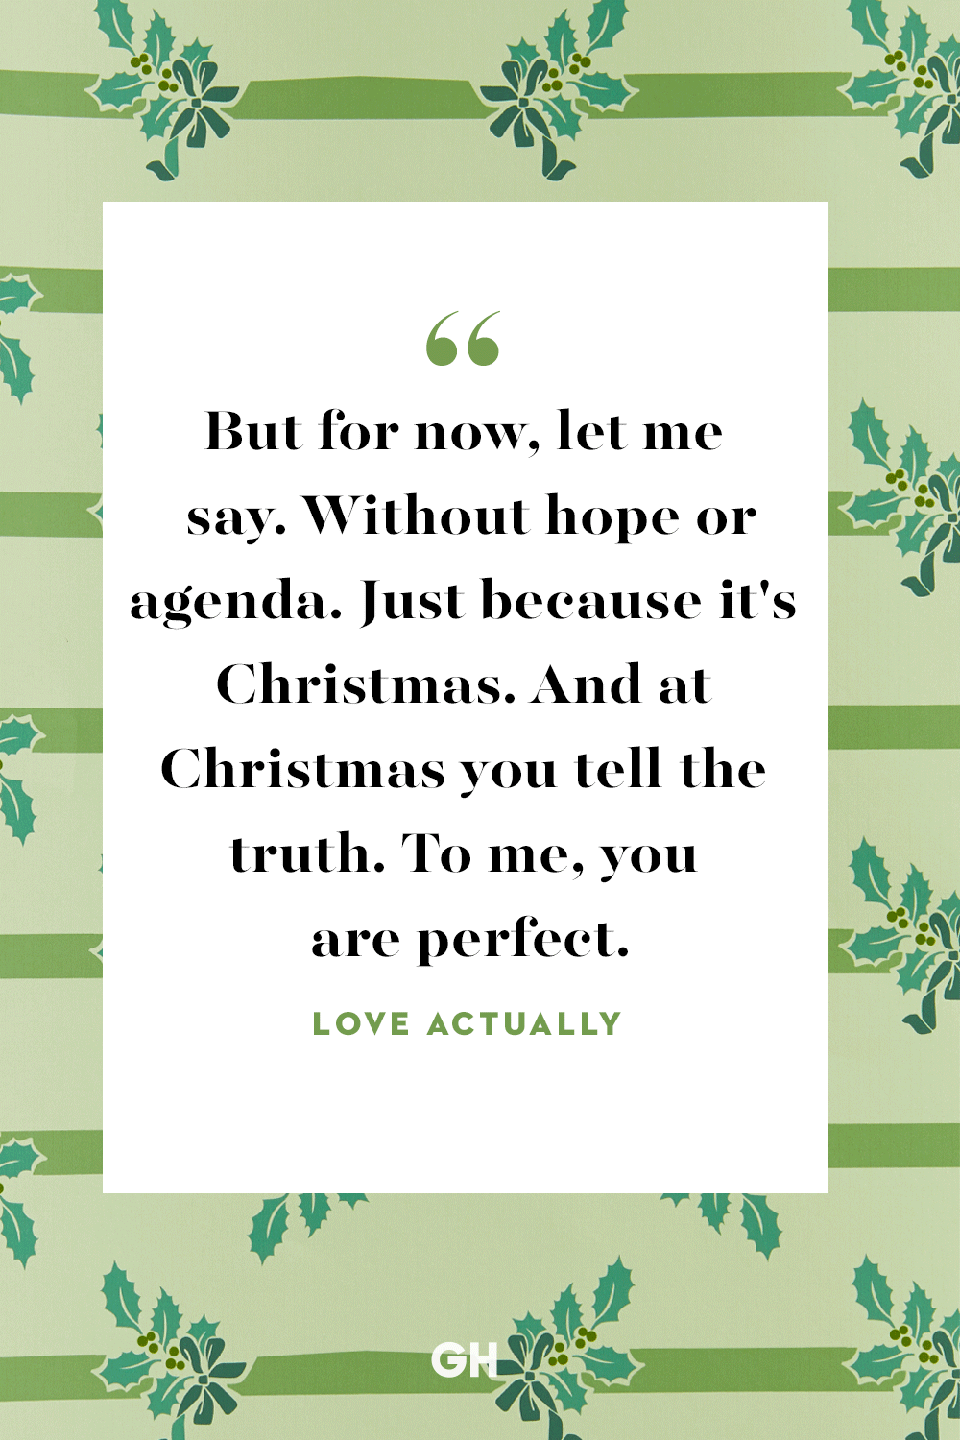 <p>But for now, let me say. Without hope or agenda. Just because it's Christmas. And at Christmas you tell the truth. To me, you are perfect.</p>